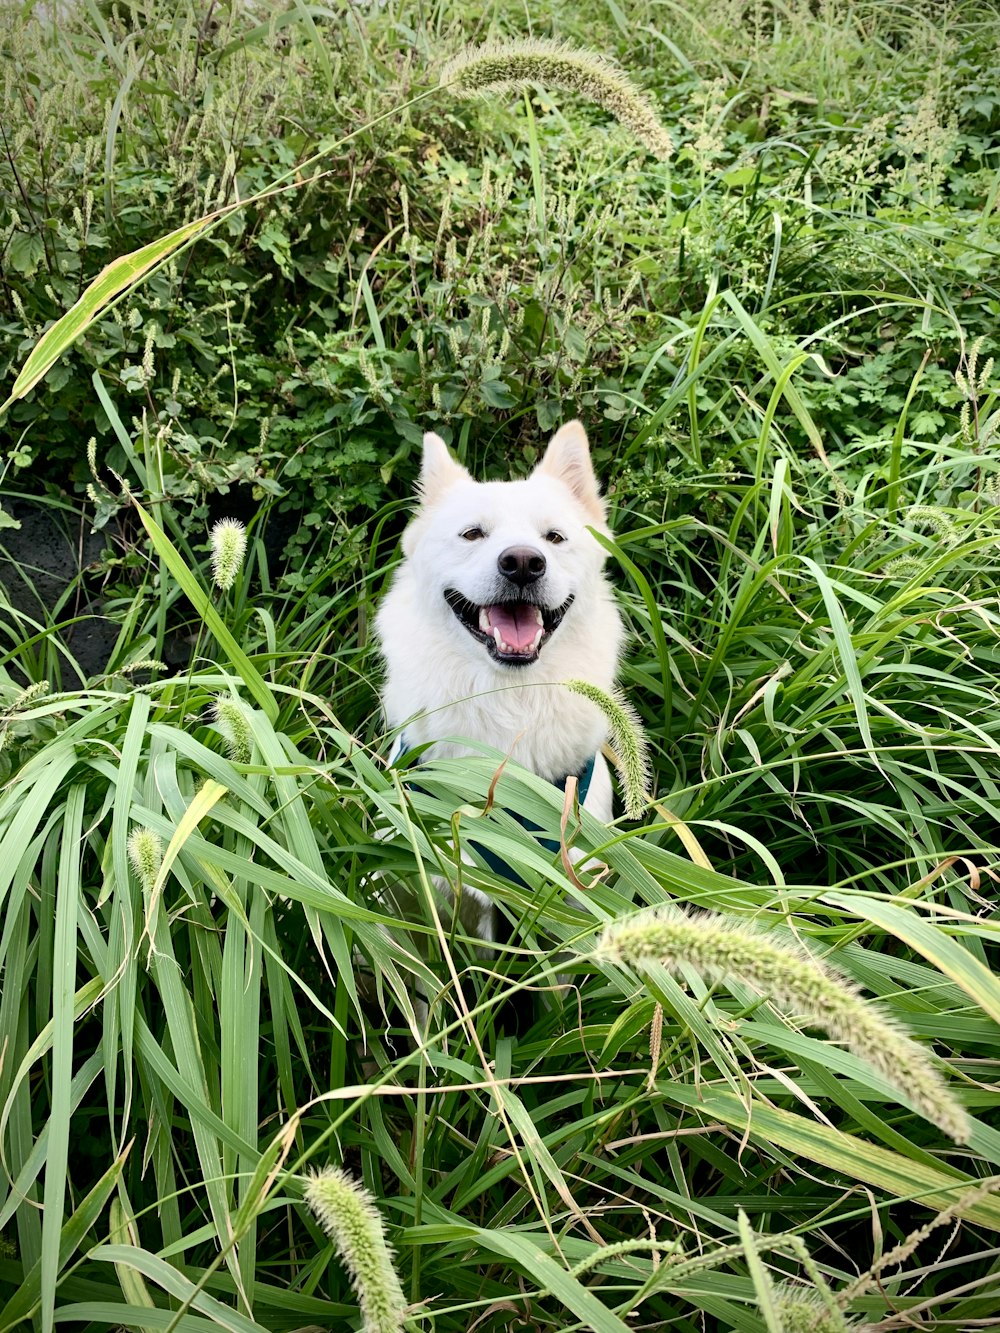 a white dog sitting in a field of tall grass